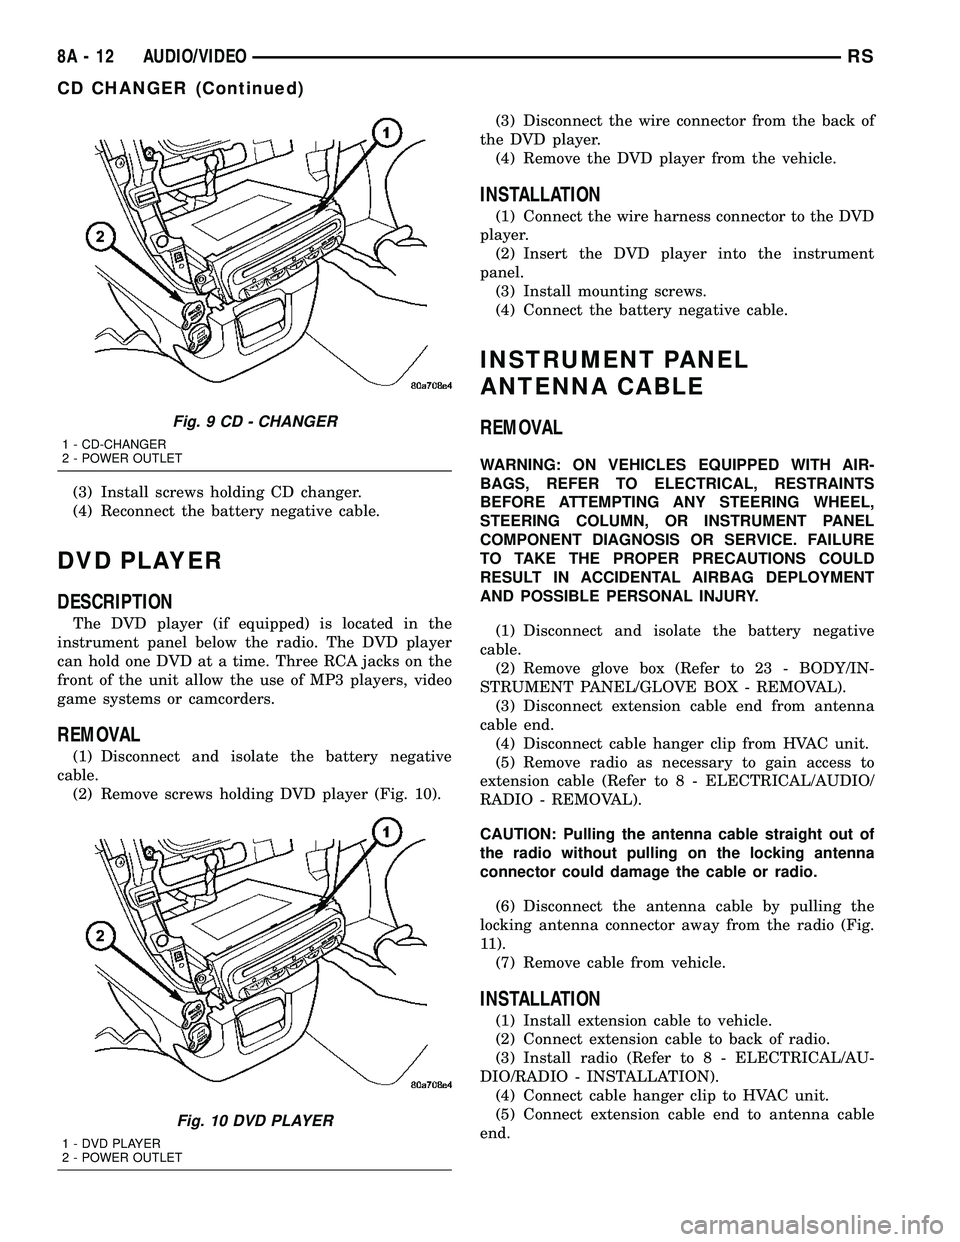 CHRYSLER VOYAGER 2005  Service Manual (3) Install screws holding CD changer.
(4) Reconnect the battery negative cable.
DVD PLAYER
DESCRIPTION
The DVD player (if equipped) is located in the
instrument panel below the radio. The DVD player
